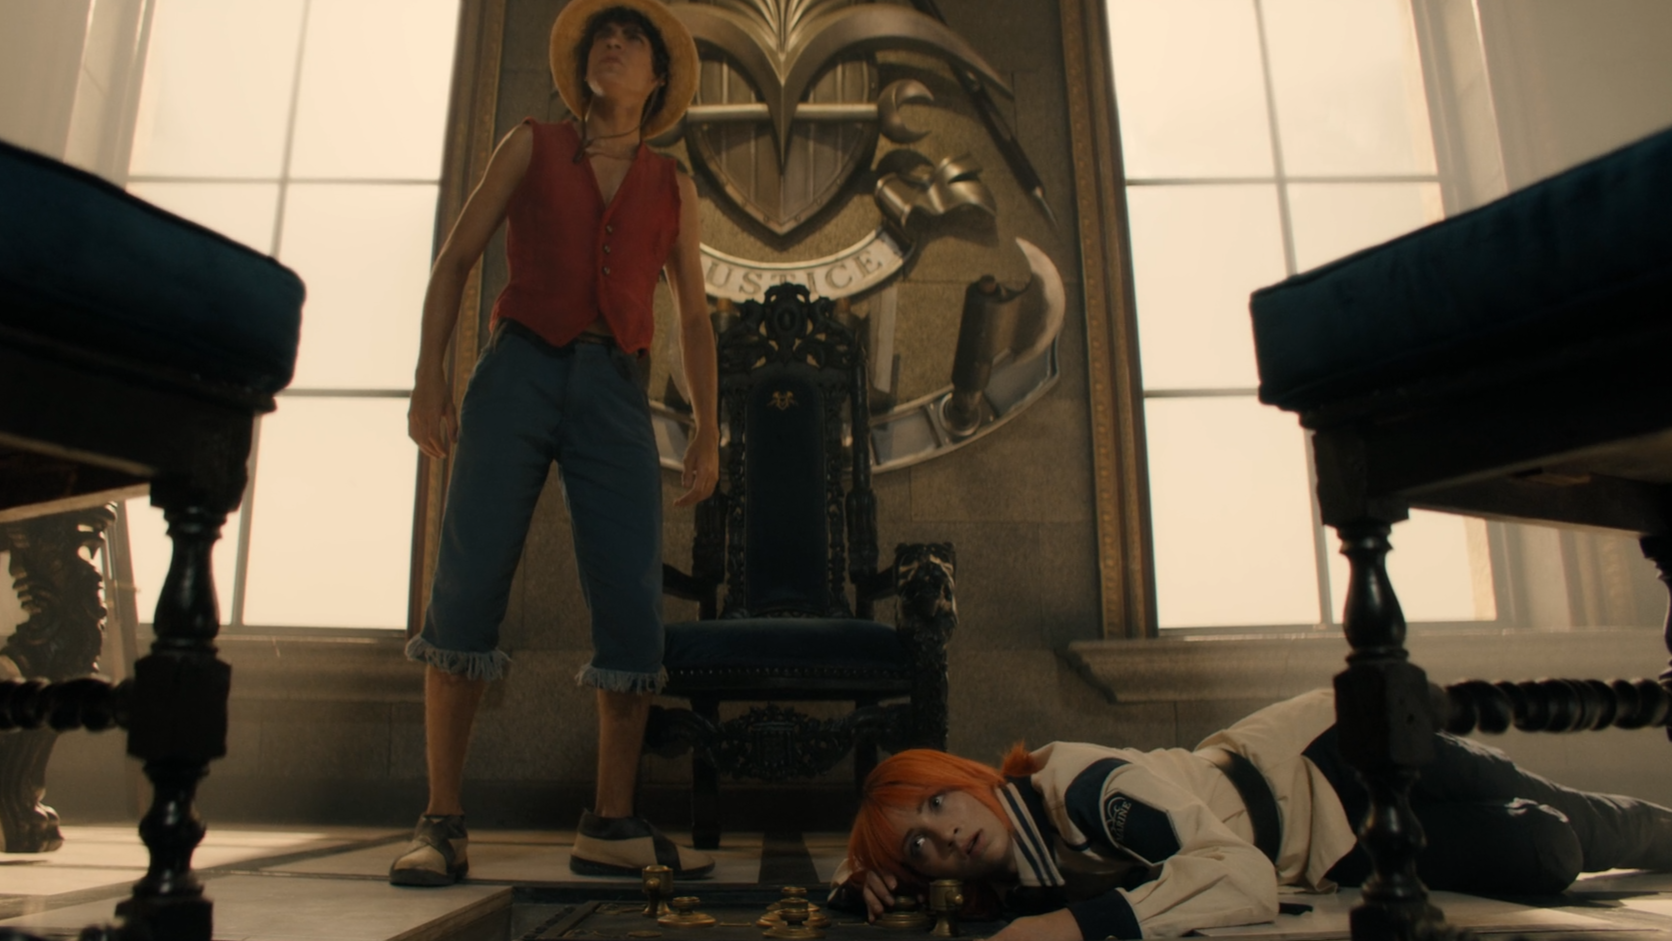 One Piece Live Action Romance Dawn Luffy And Nami Steal From Morgan Office